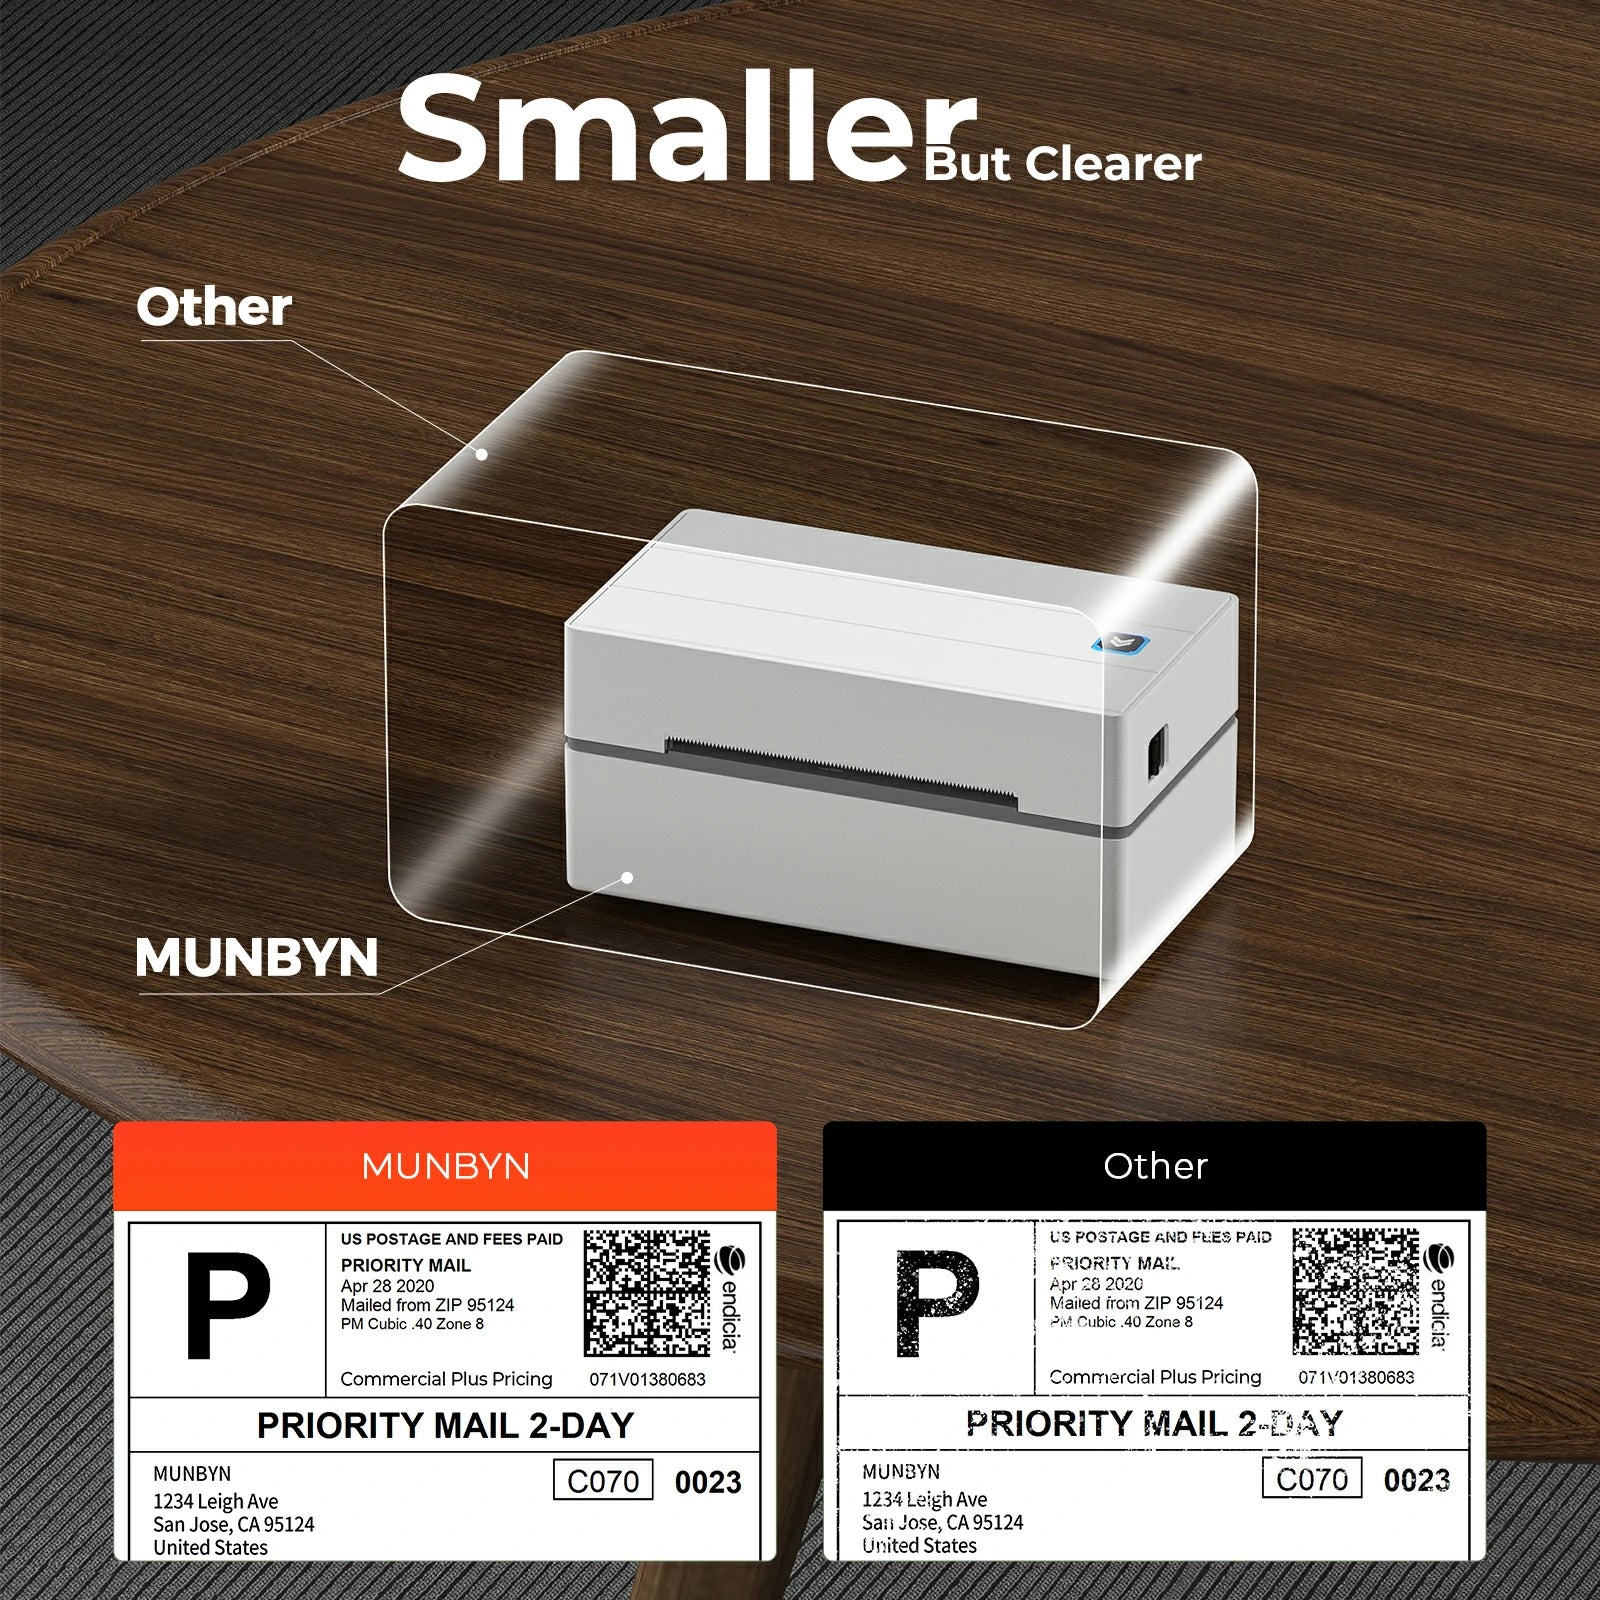 The MUNBYN 130B thermal label printer is smaller than most traditional printers and has a 203 DPI resolution.